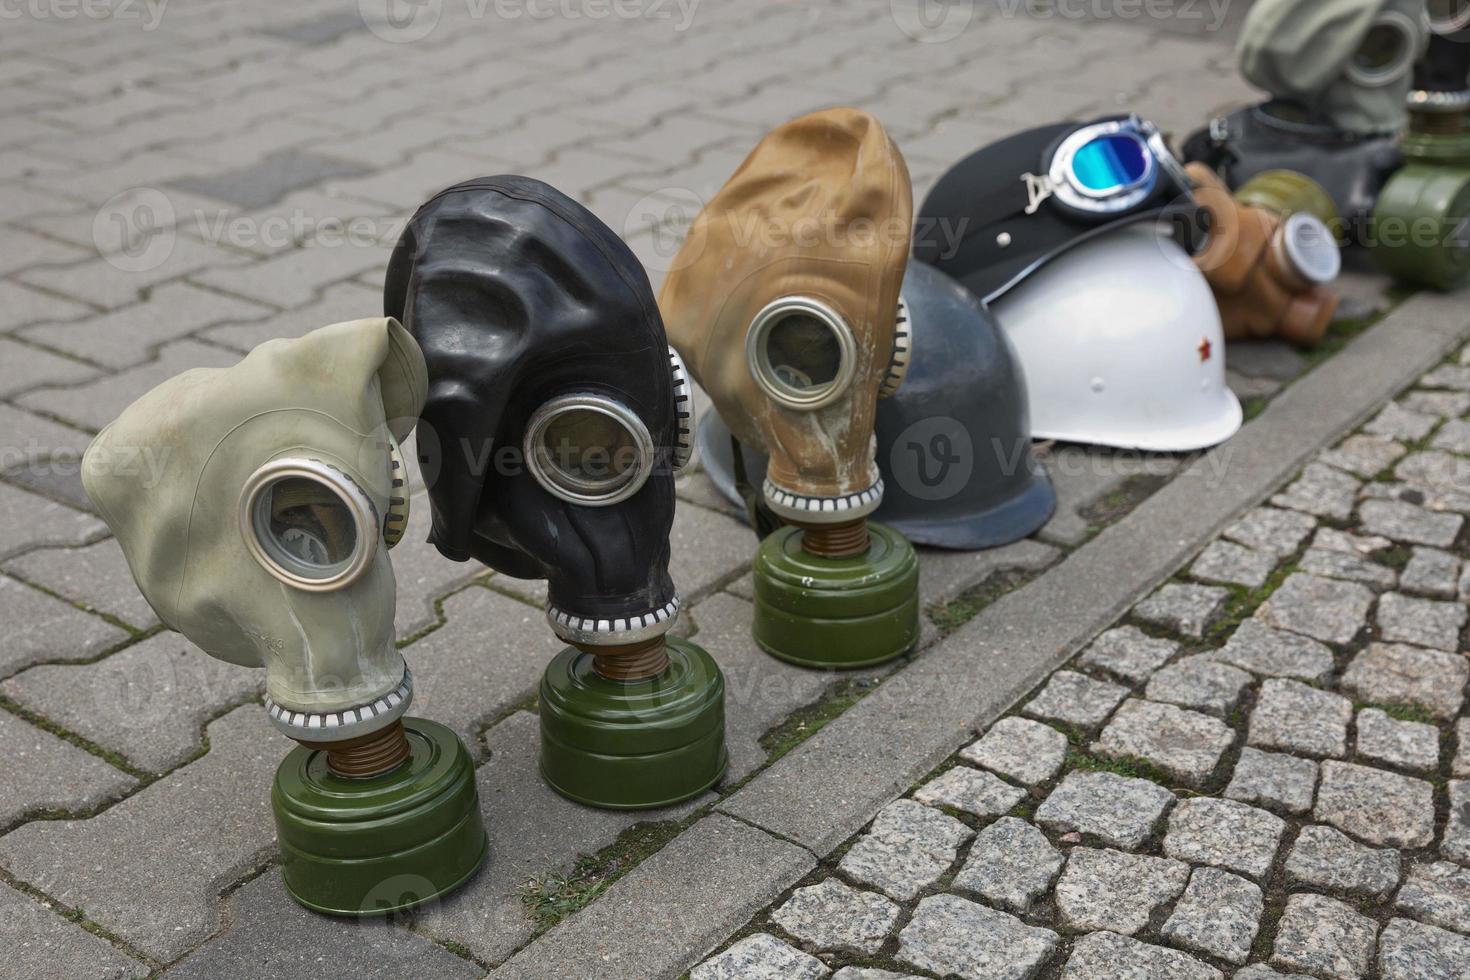 Gas masks of second world war displayed on street for tourists as souvenir photo